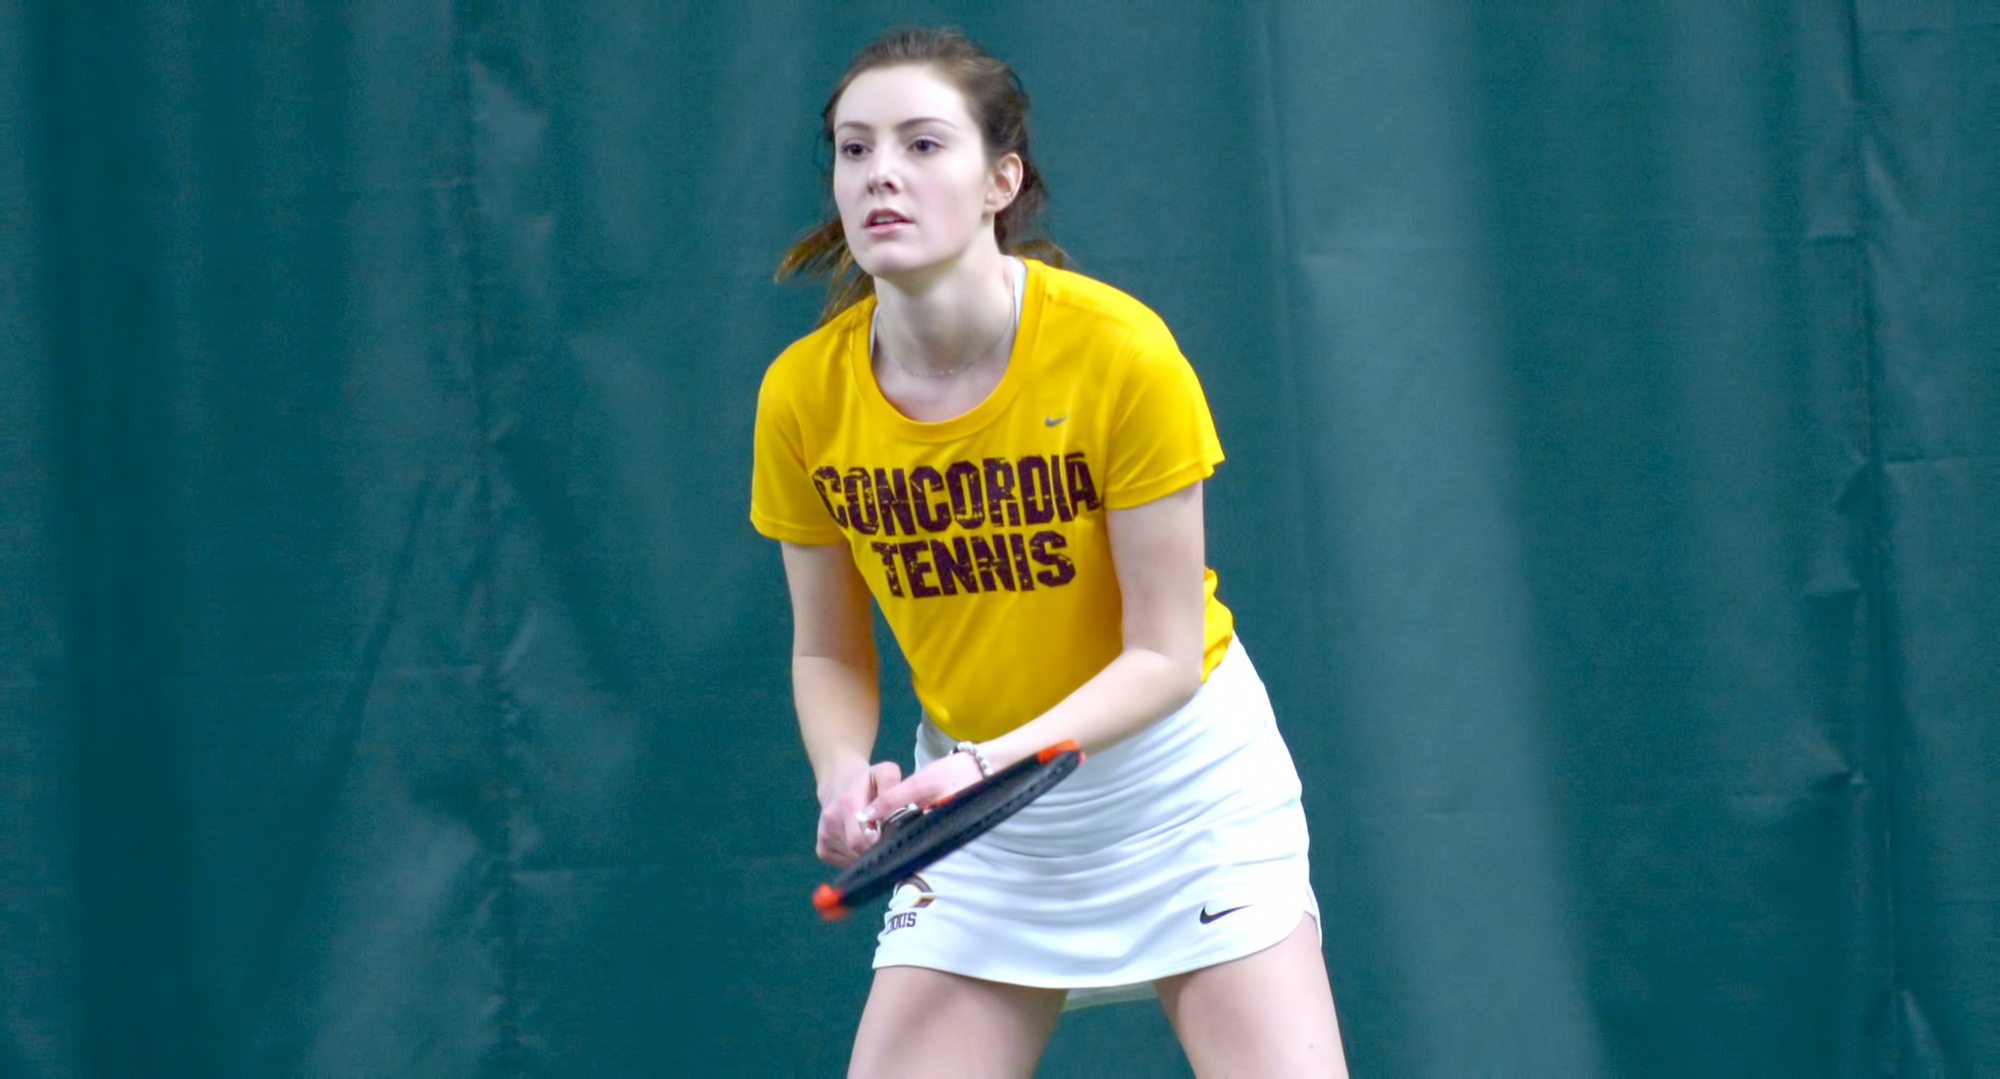 Freshman Jenna Forknell teams with Maia Wednel and lost a pair of tough 8-2 decisions against two of the top MIAC teams.